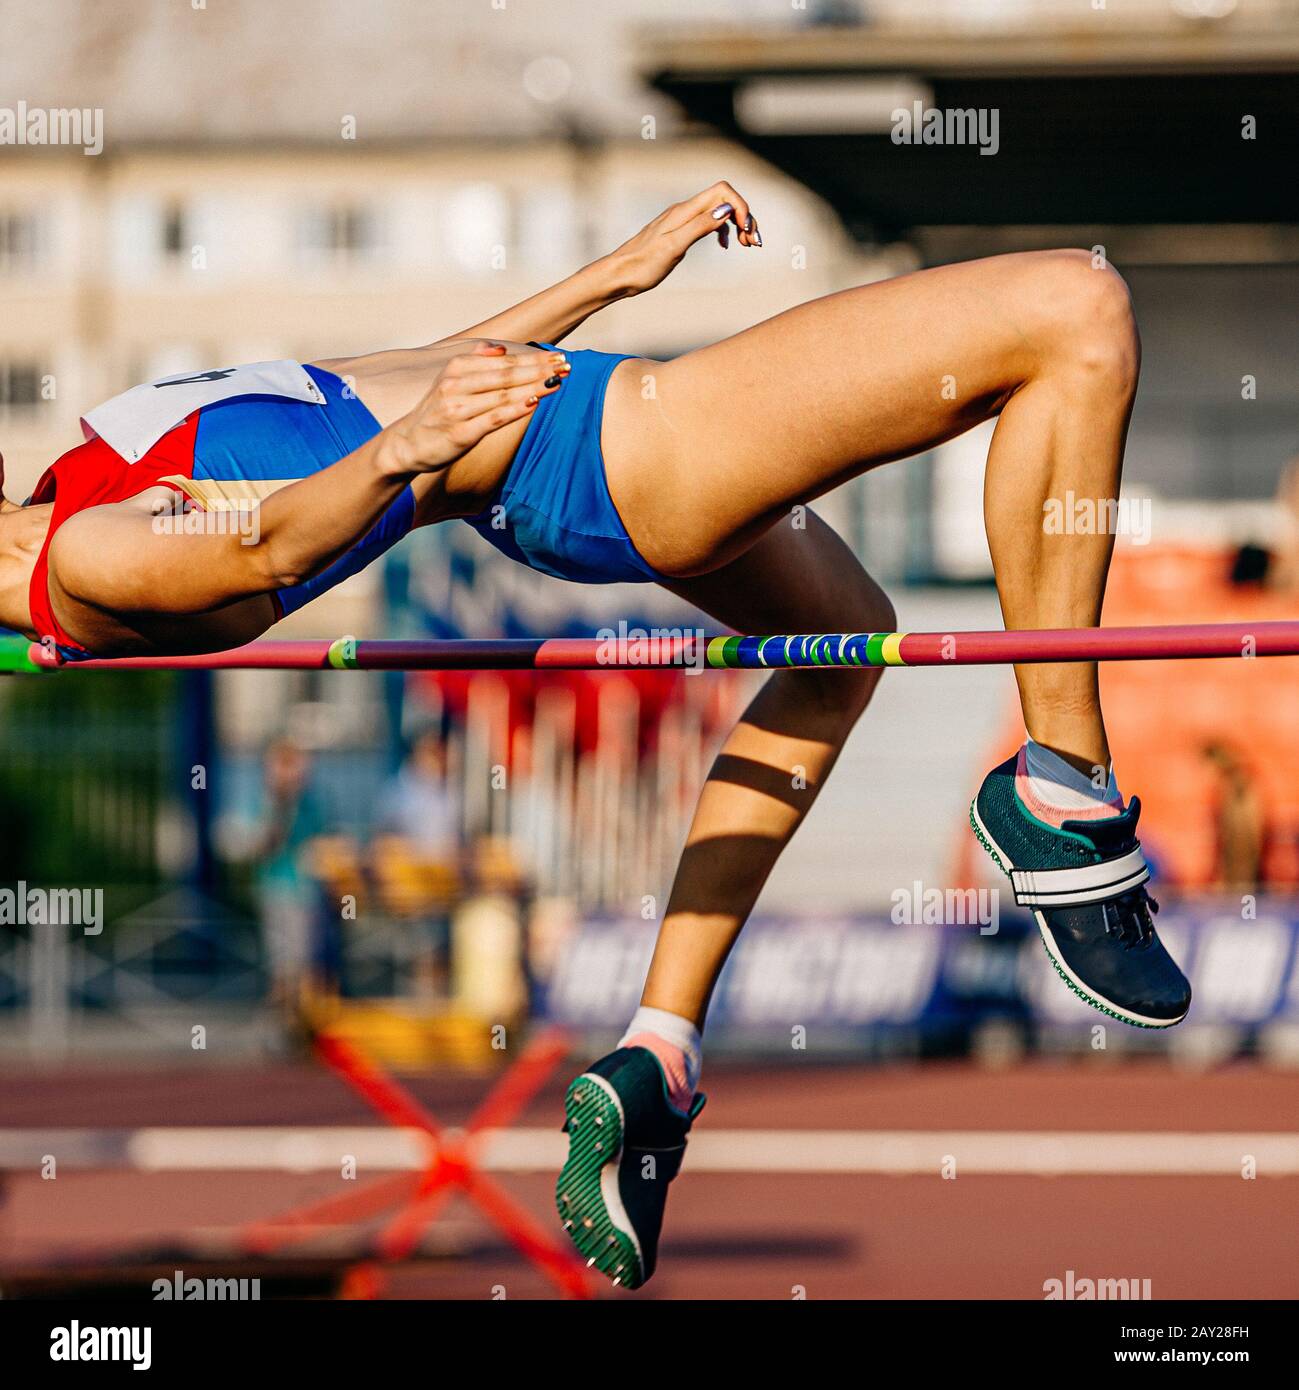 women athlete jumping high jump in athletics competition Stock Photo